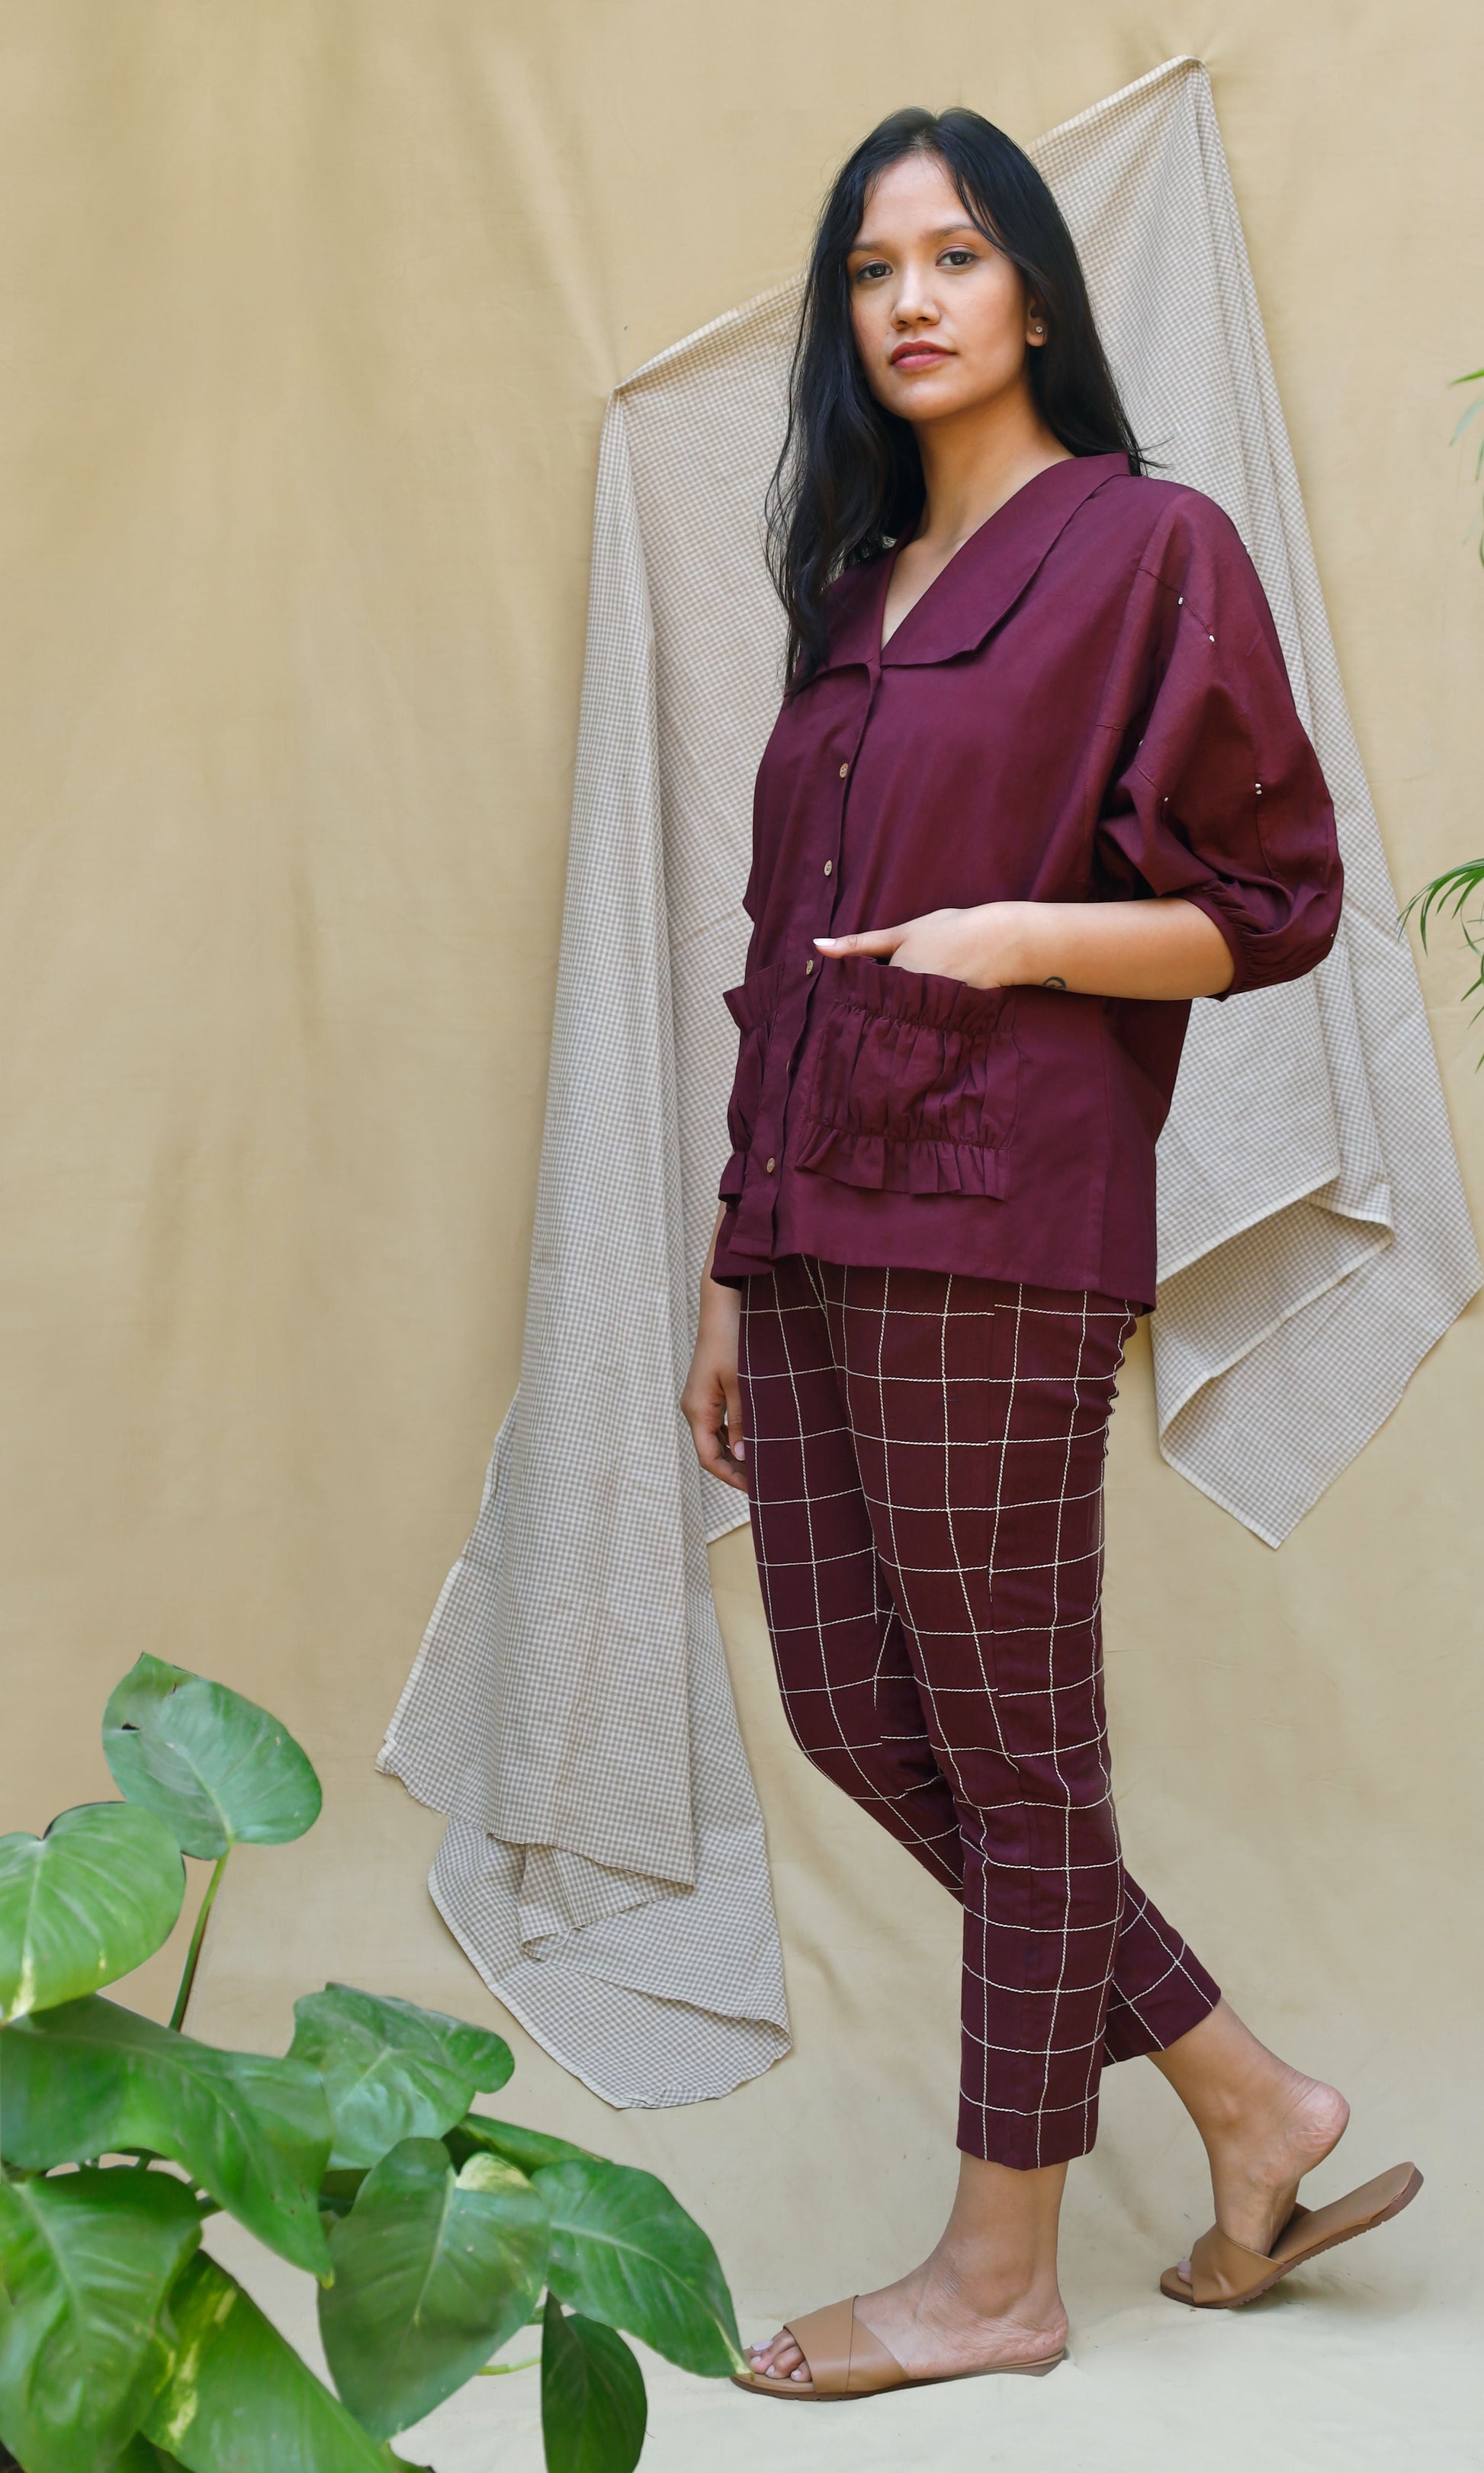 Maroon Collar Checks Complete Set at Kamakhyaa by Chambray & Co.. This item is Casual Wear, Co-ord Sets, Echo, Hand Spun Cotton, Linen, Natural, Purple, Regular Fit, Solids, Travel, Travel Co-ords, Womenswear